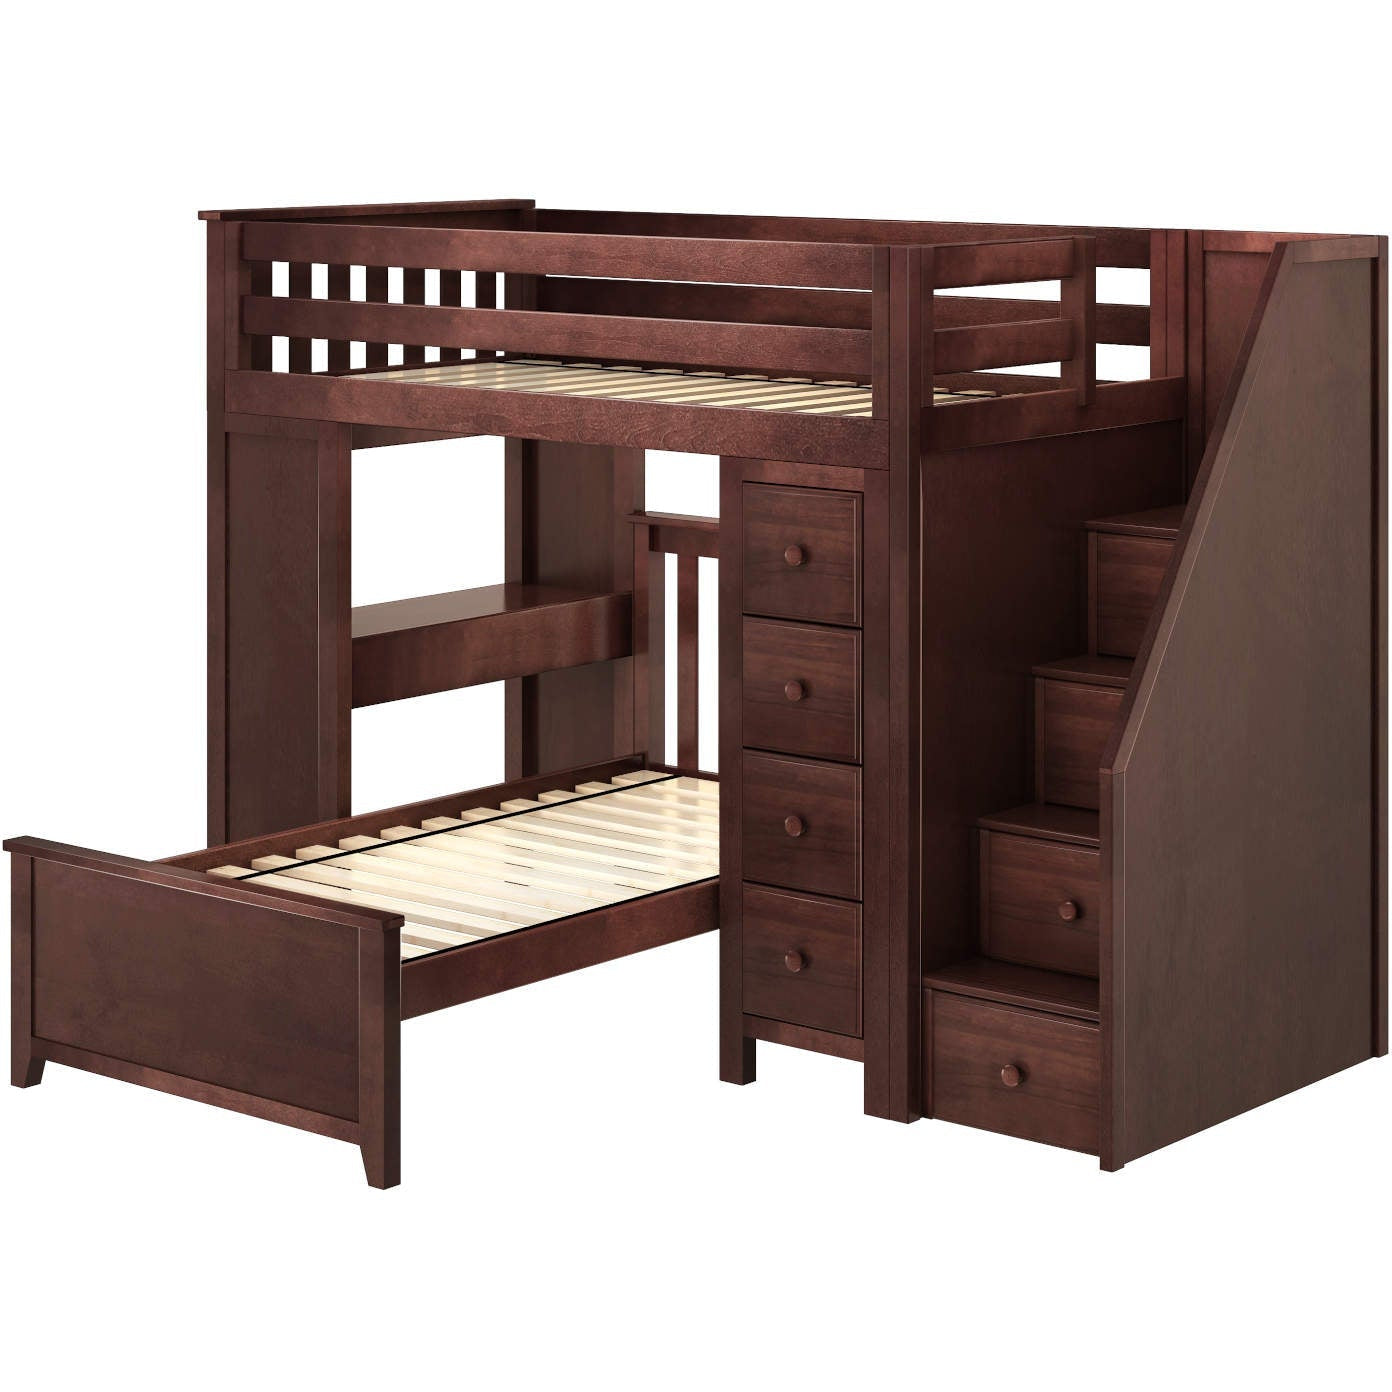 Jackpot Deluxe "CHESTER 4" Staircase Loft Bed Desk + Dresser, Twin